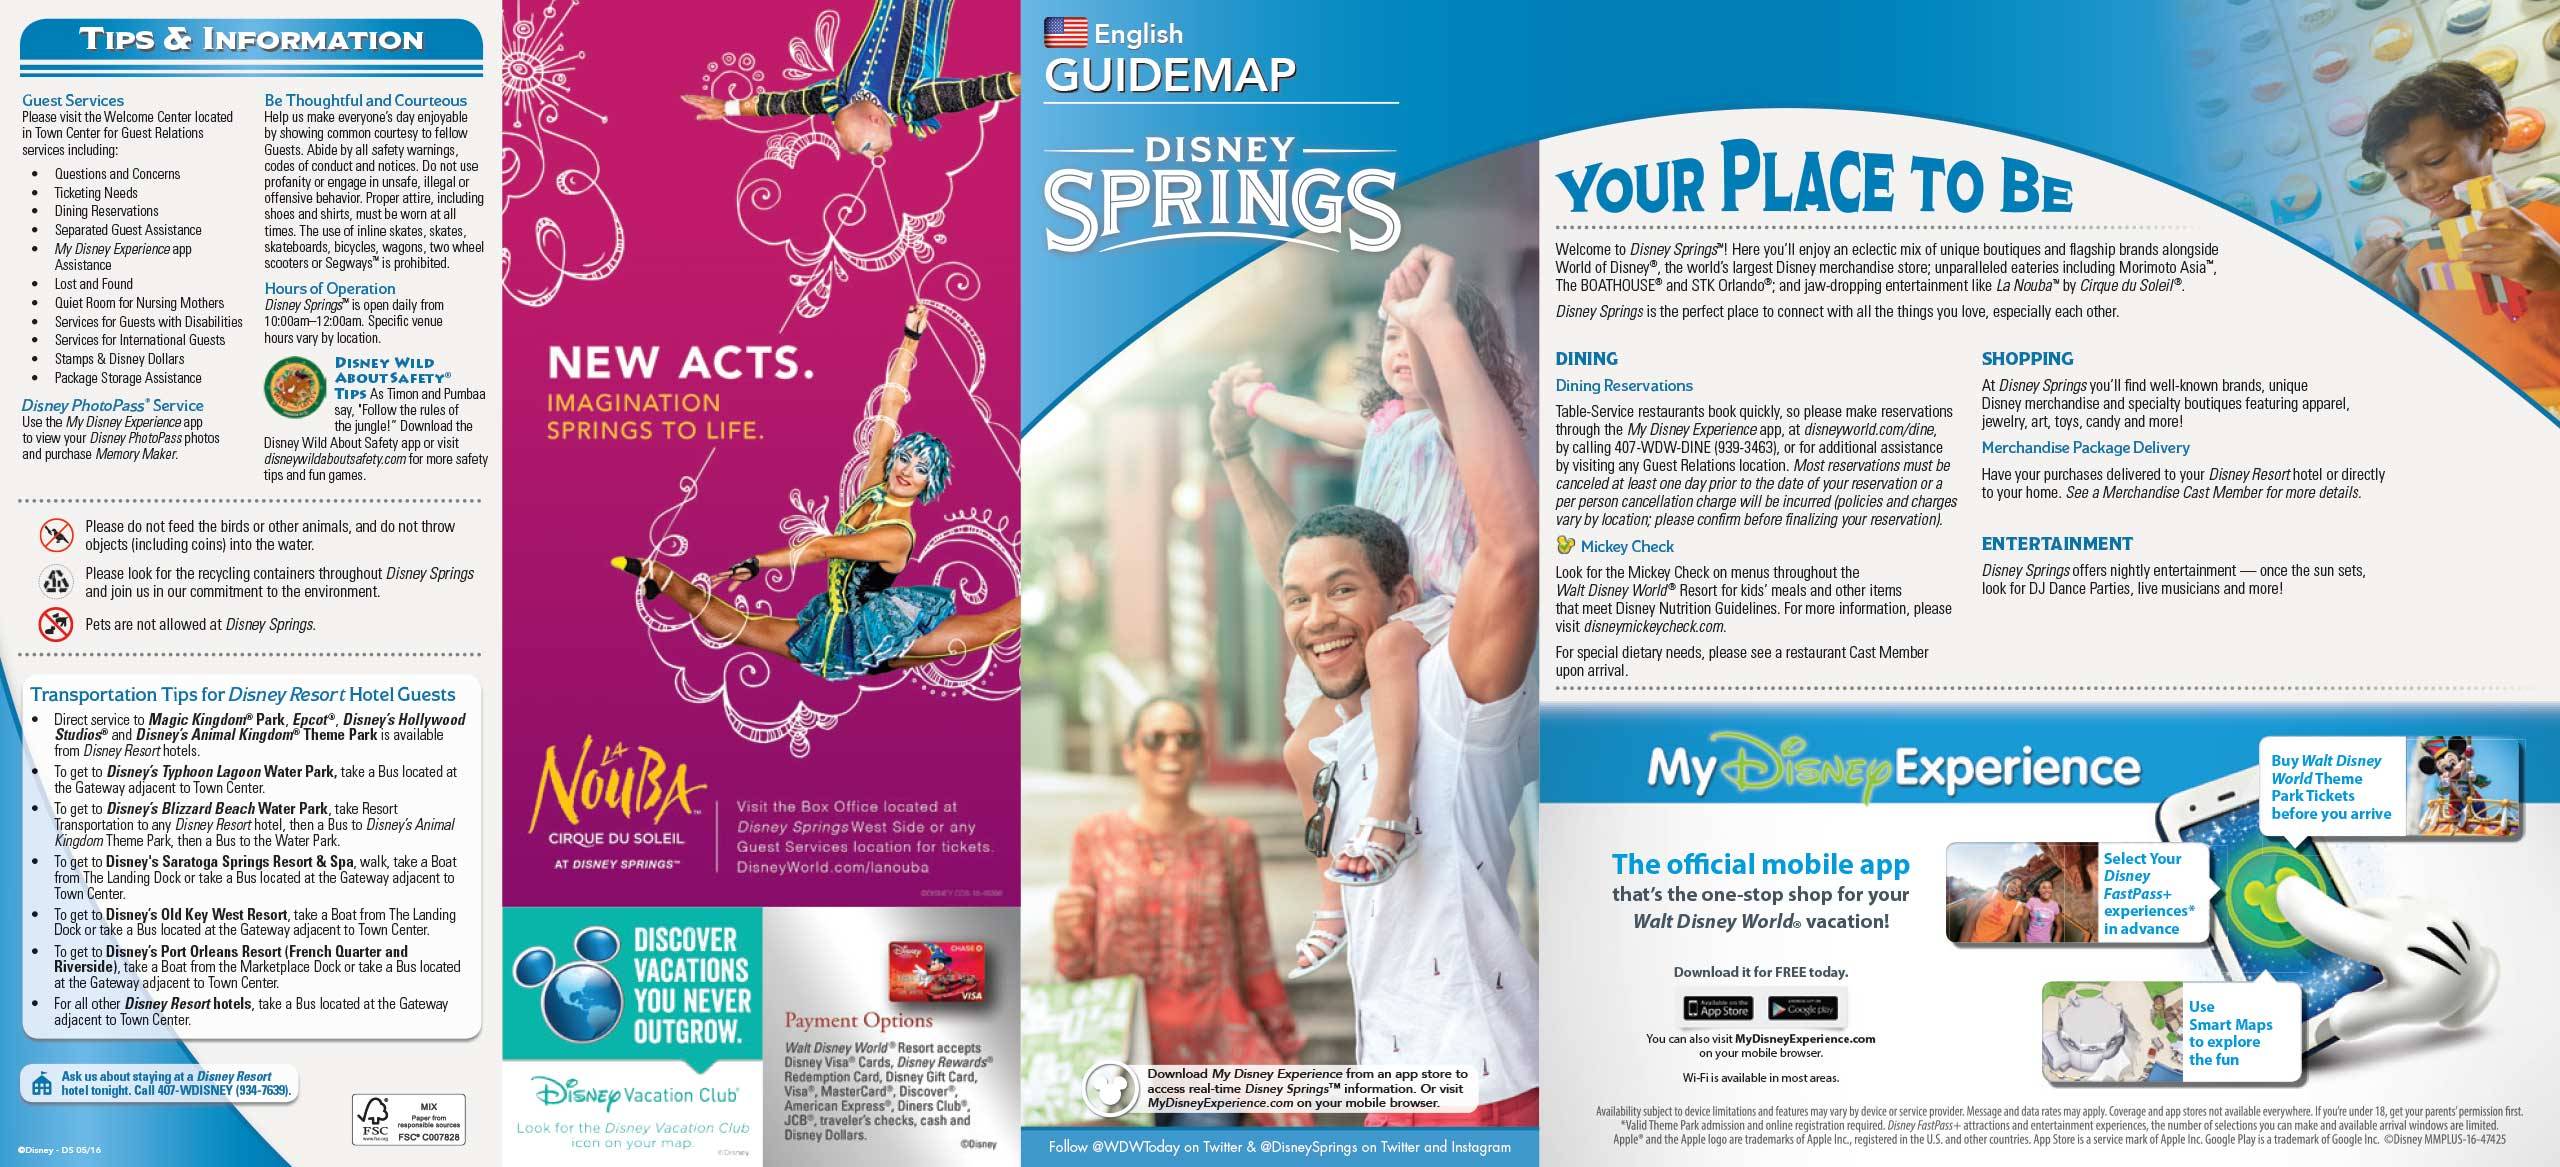 Disney Springs guide map with the Town Center